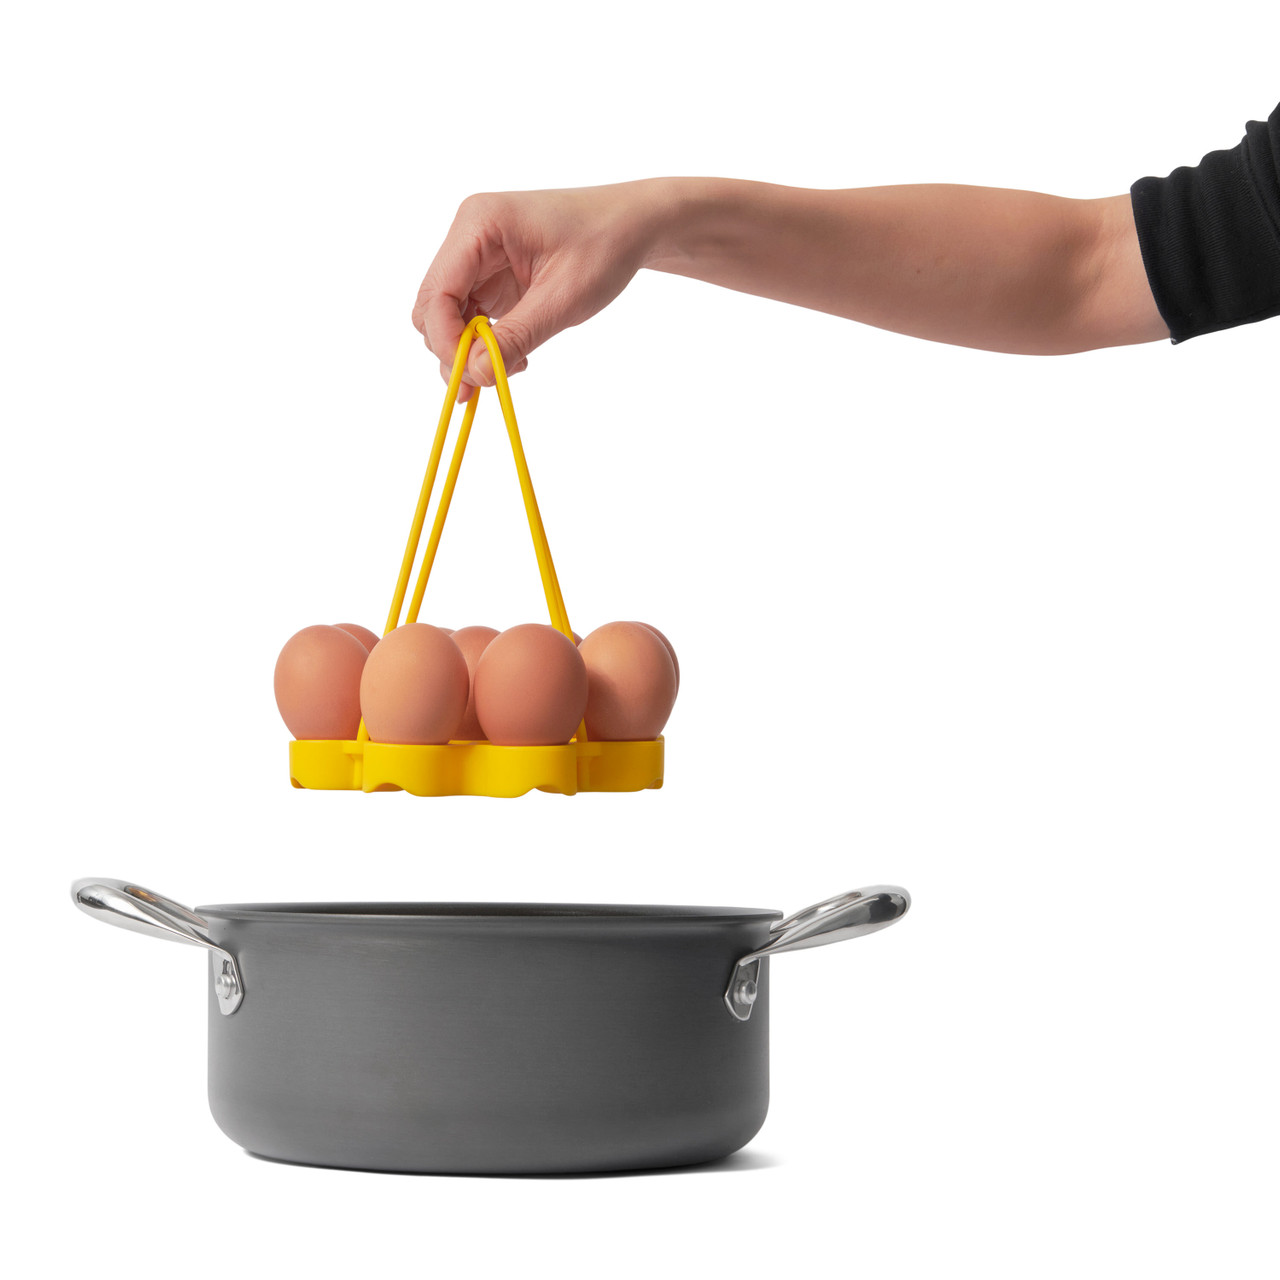 Lift from the pot with ease